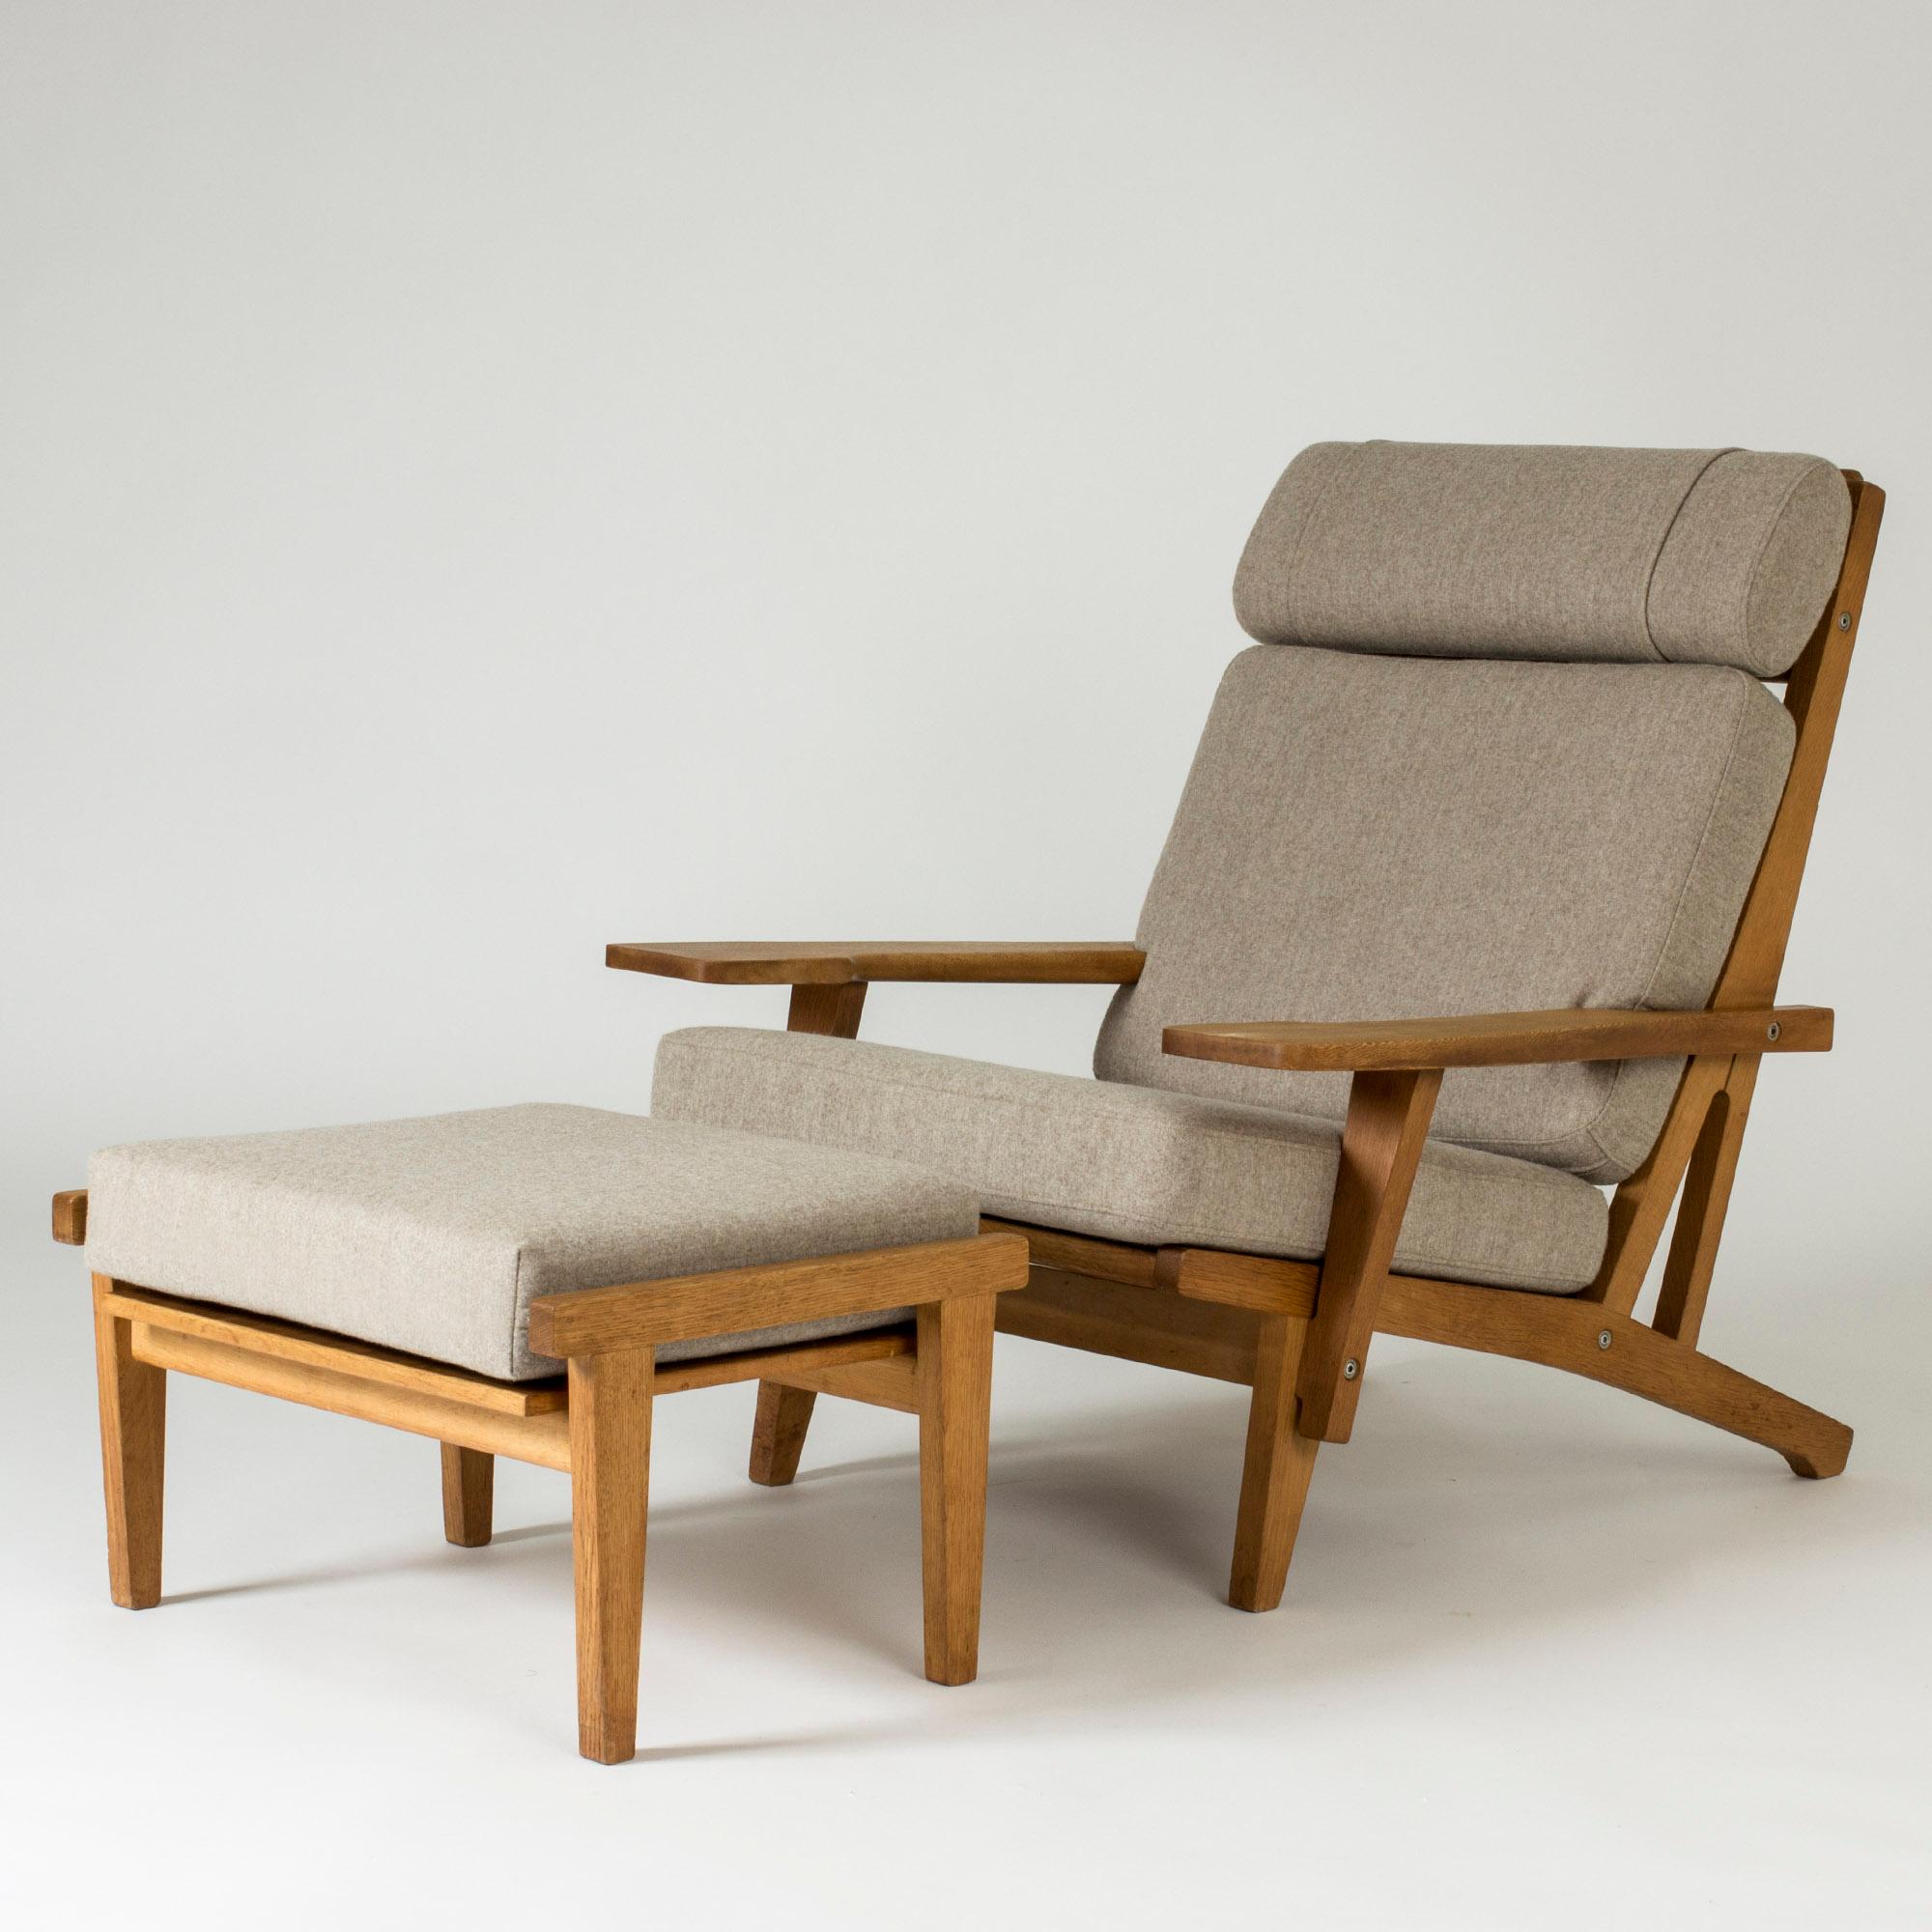 Cool lounge chair and footstool by Hans J. Wegner, with wide proportions. Elegant, sturdy lines. Made from oak with wool upholstery in a warm oatmeal tone.